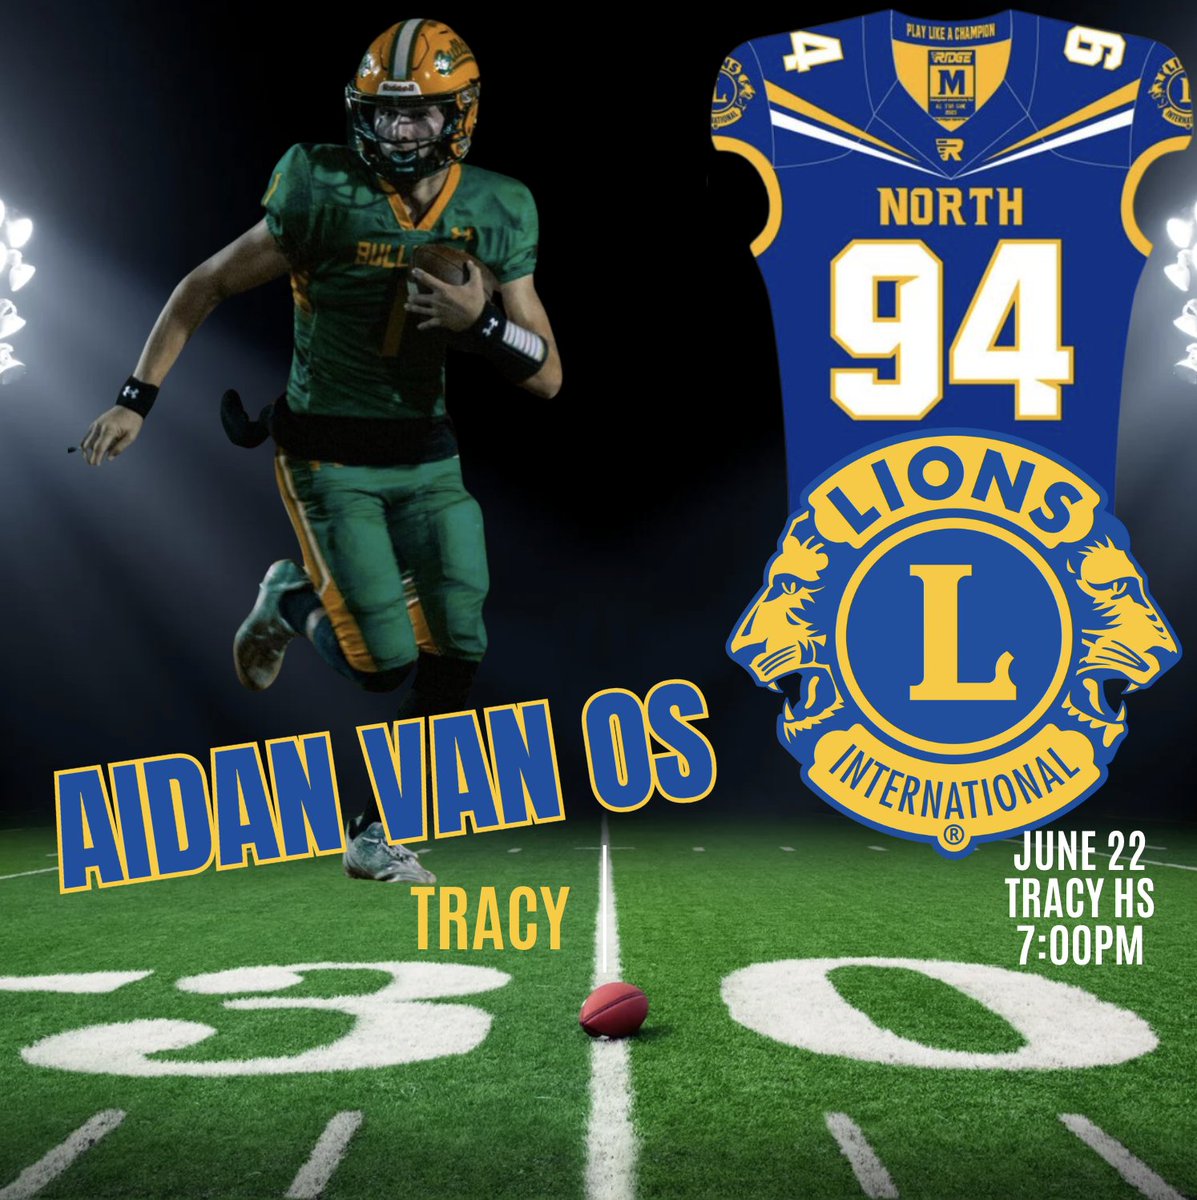 Congrats to @AidanVanOs1 of Tracy HS for being selected to the North team of the Lions' All-Star game! @CalHiSports @BlackHatFootbal